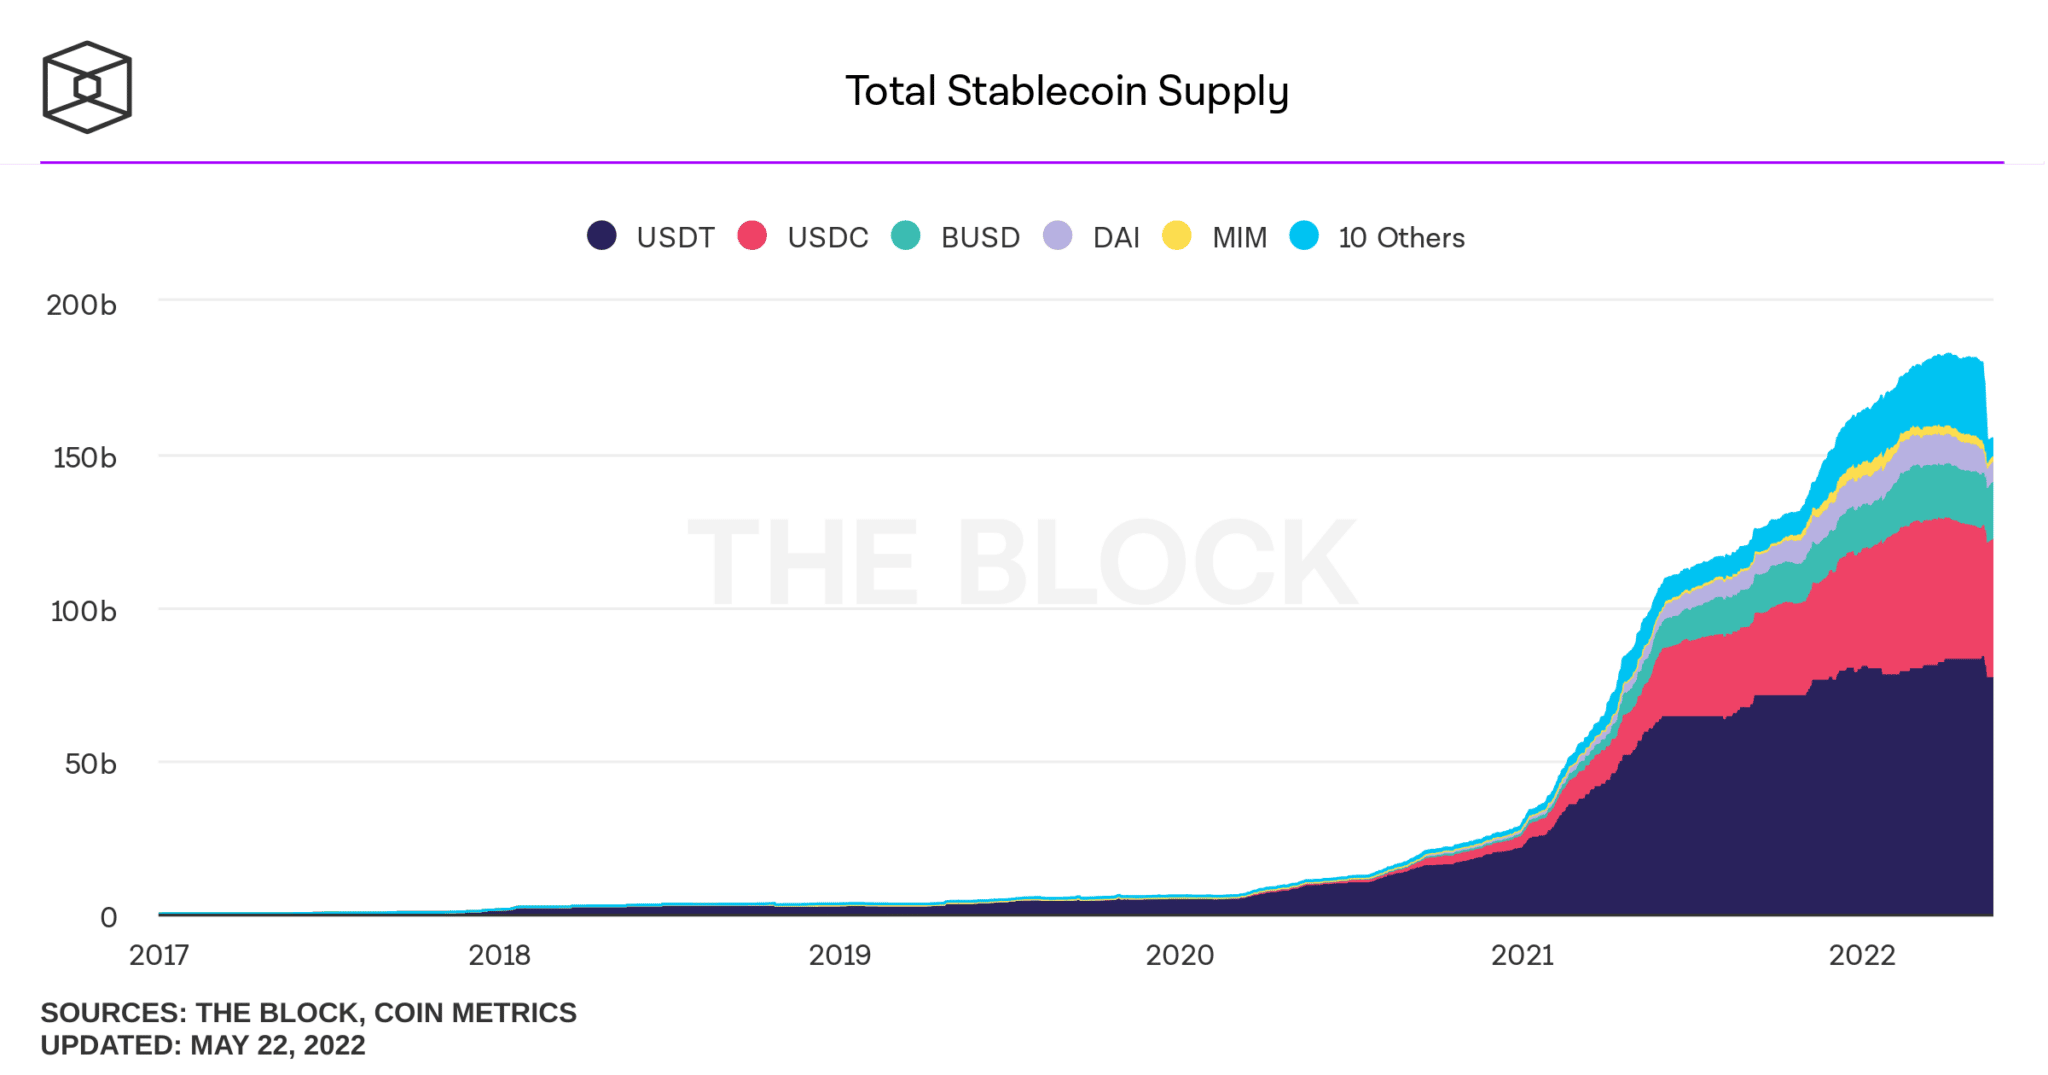 Stablecoin supply